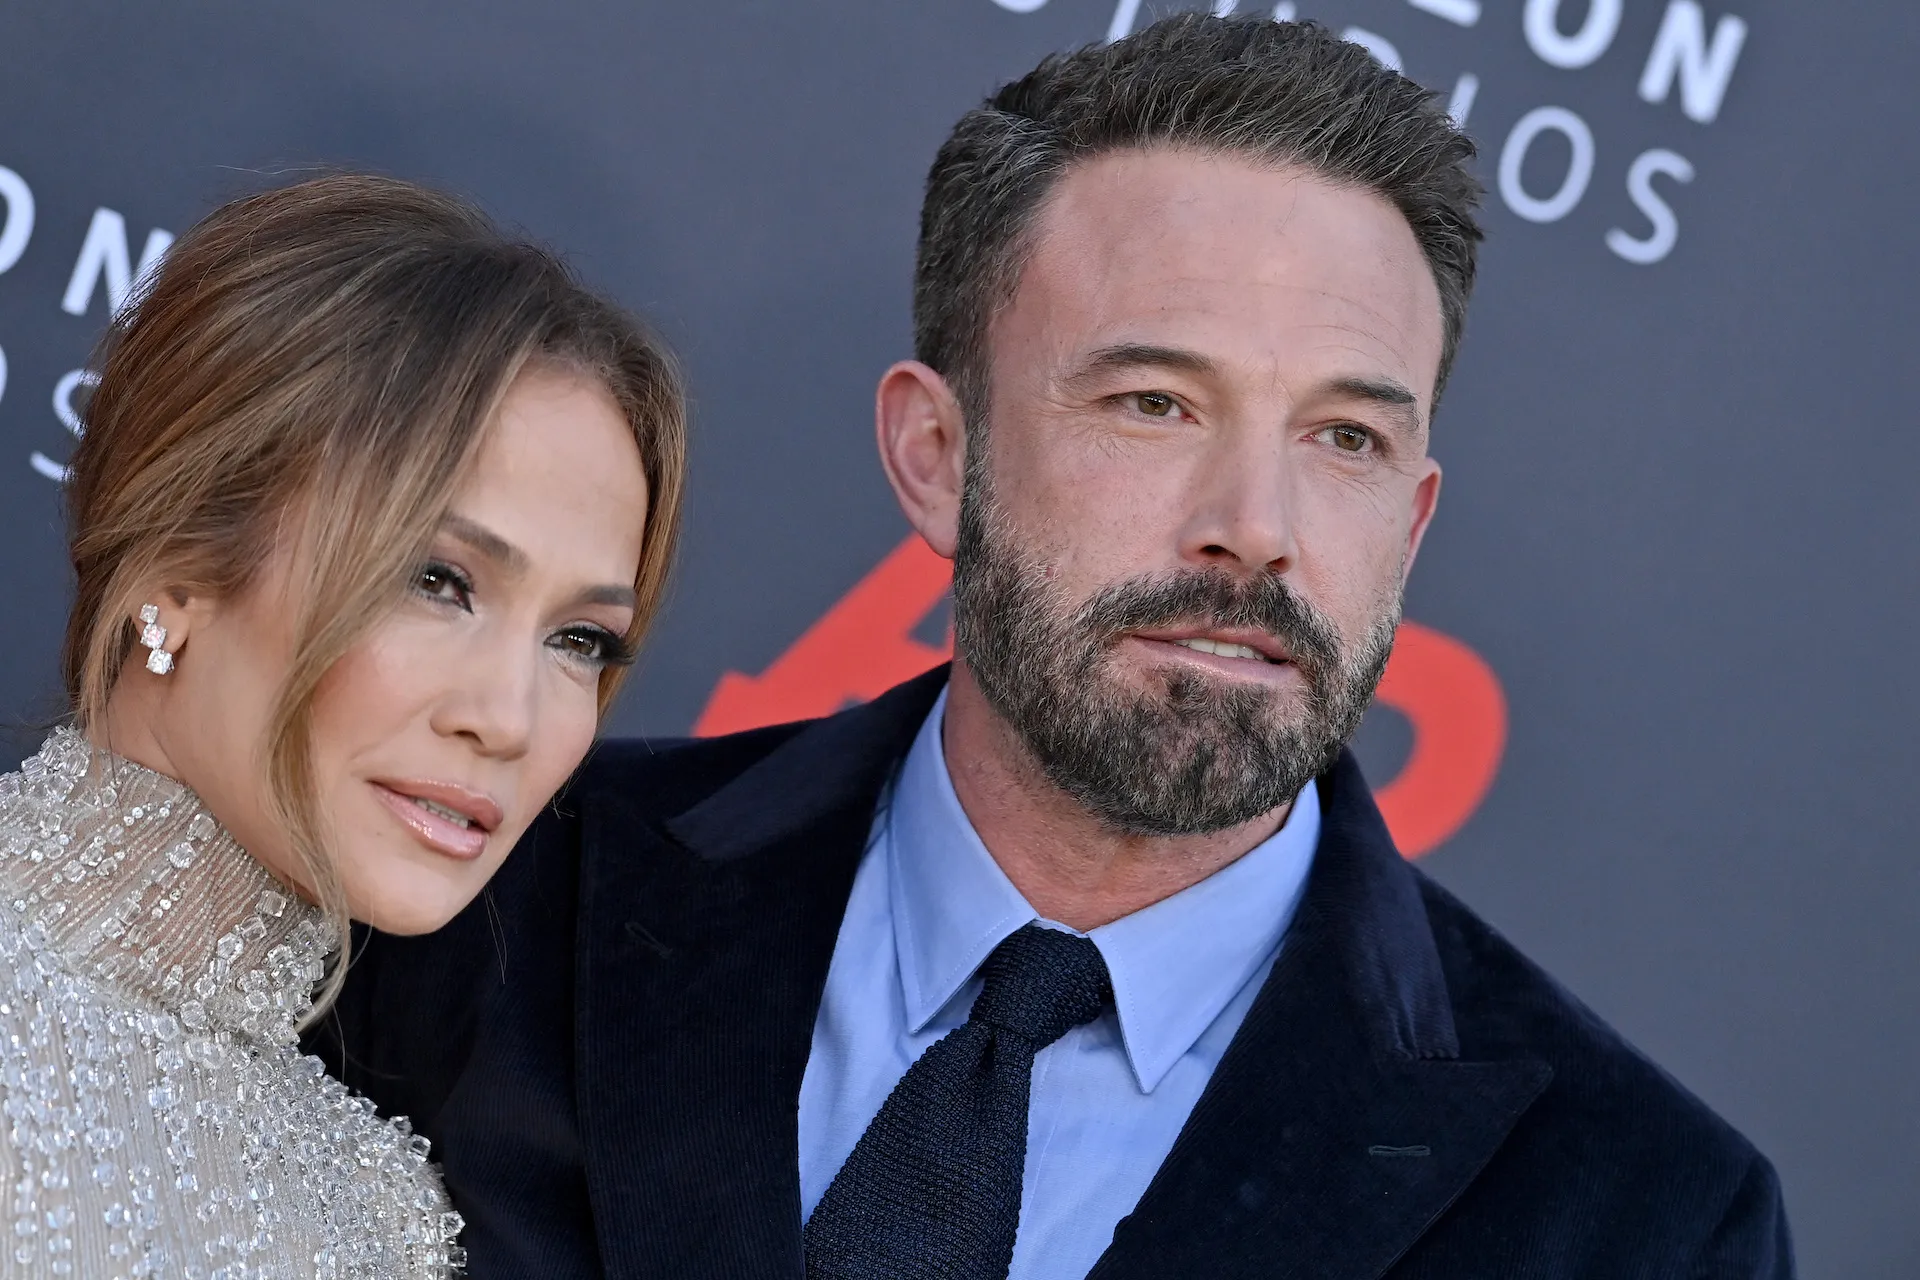 Jennifer Lopez 'Ate Junk Food' With Ben Affleck and Is Now 'Going Turbo ...